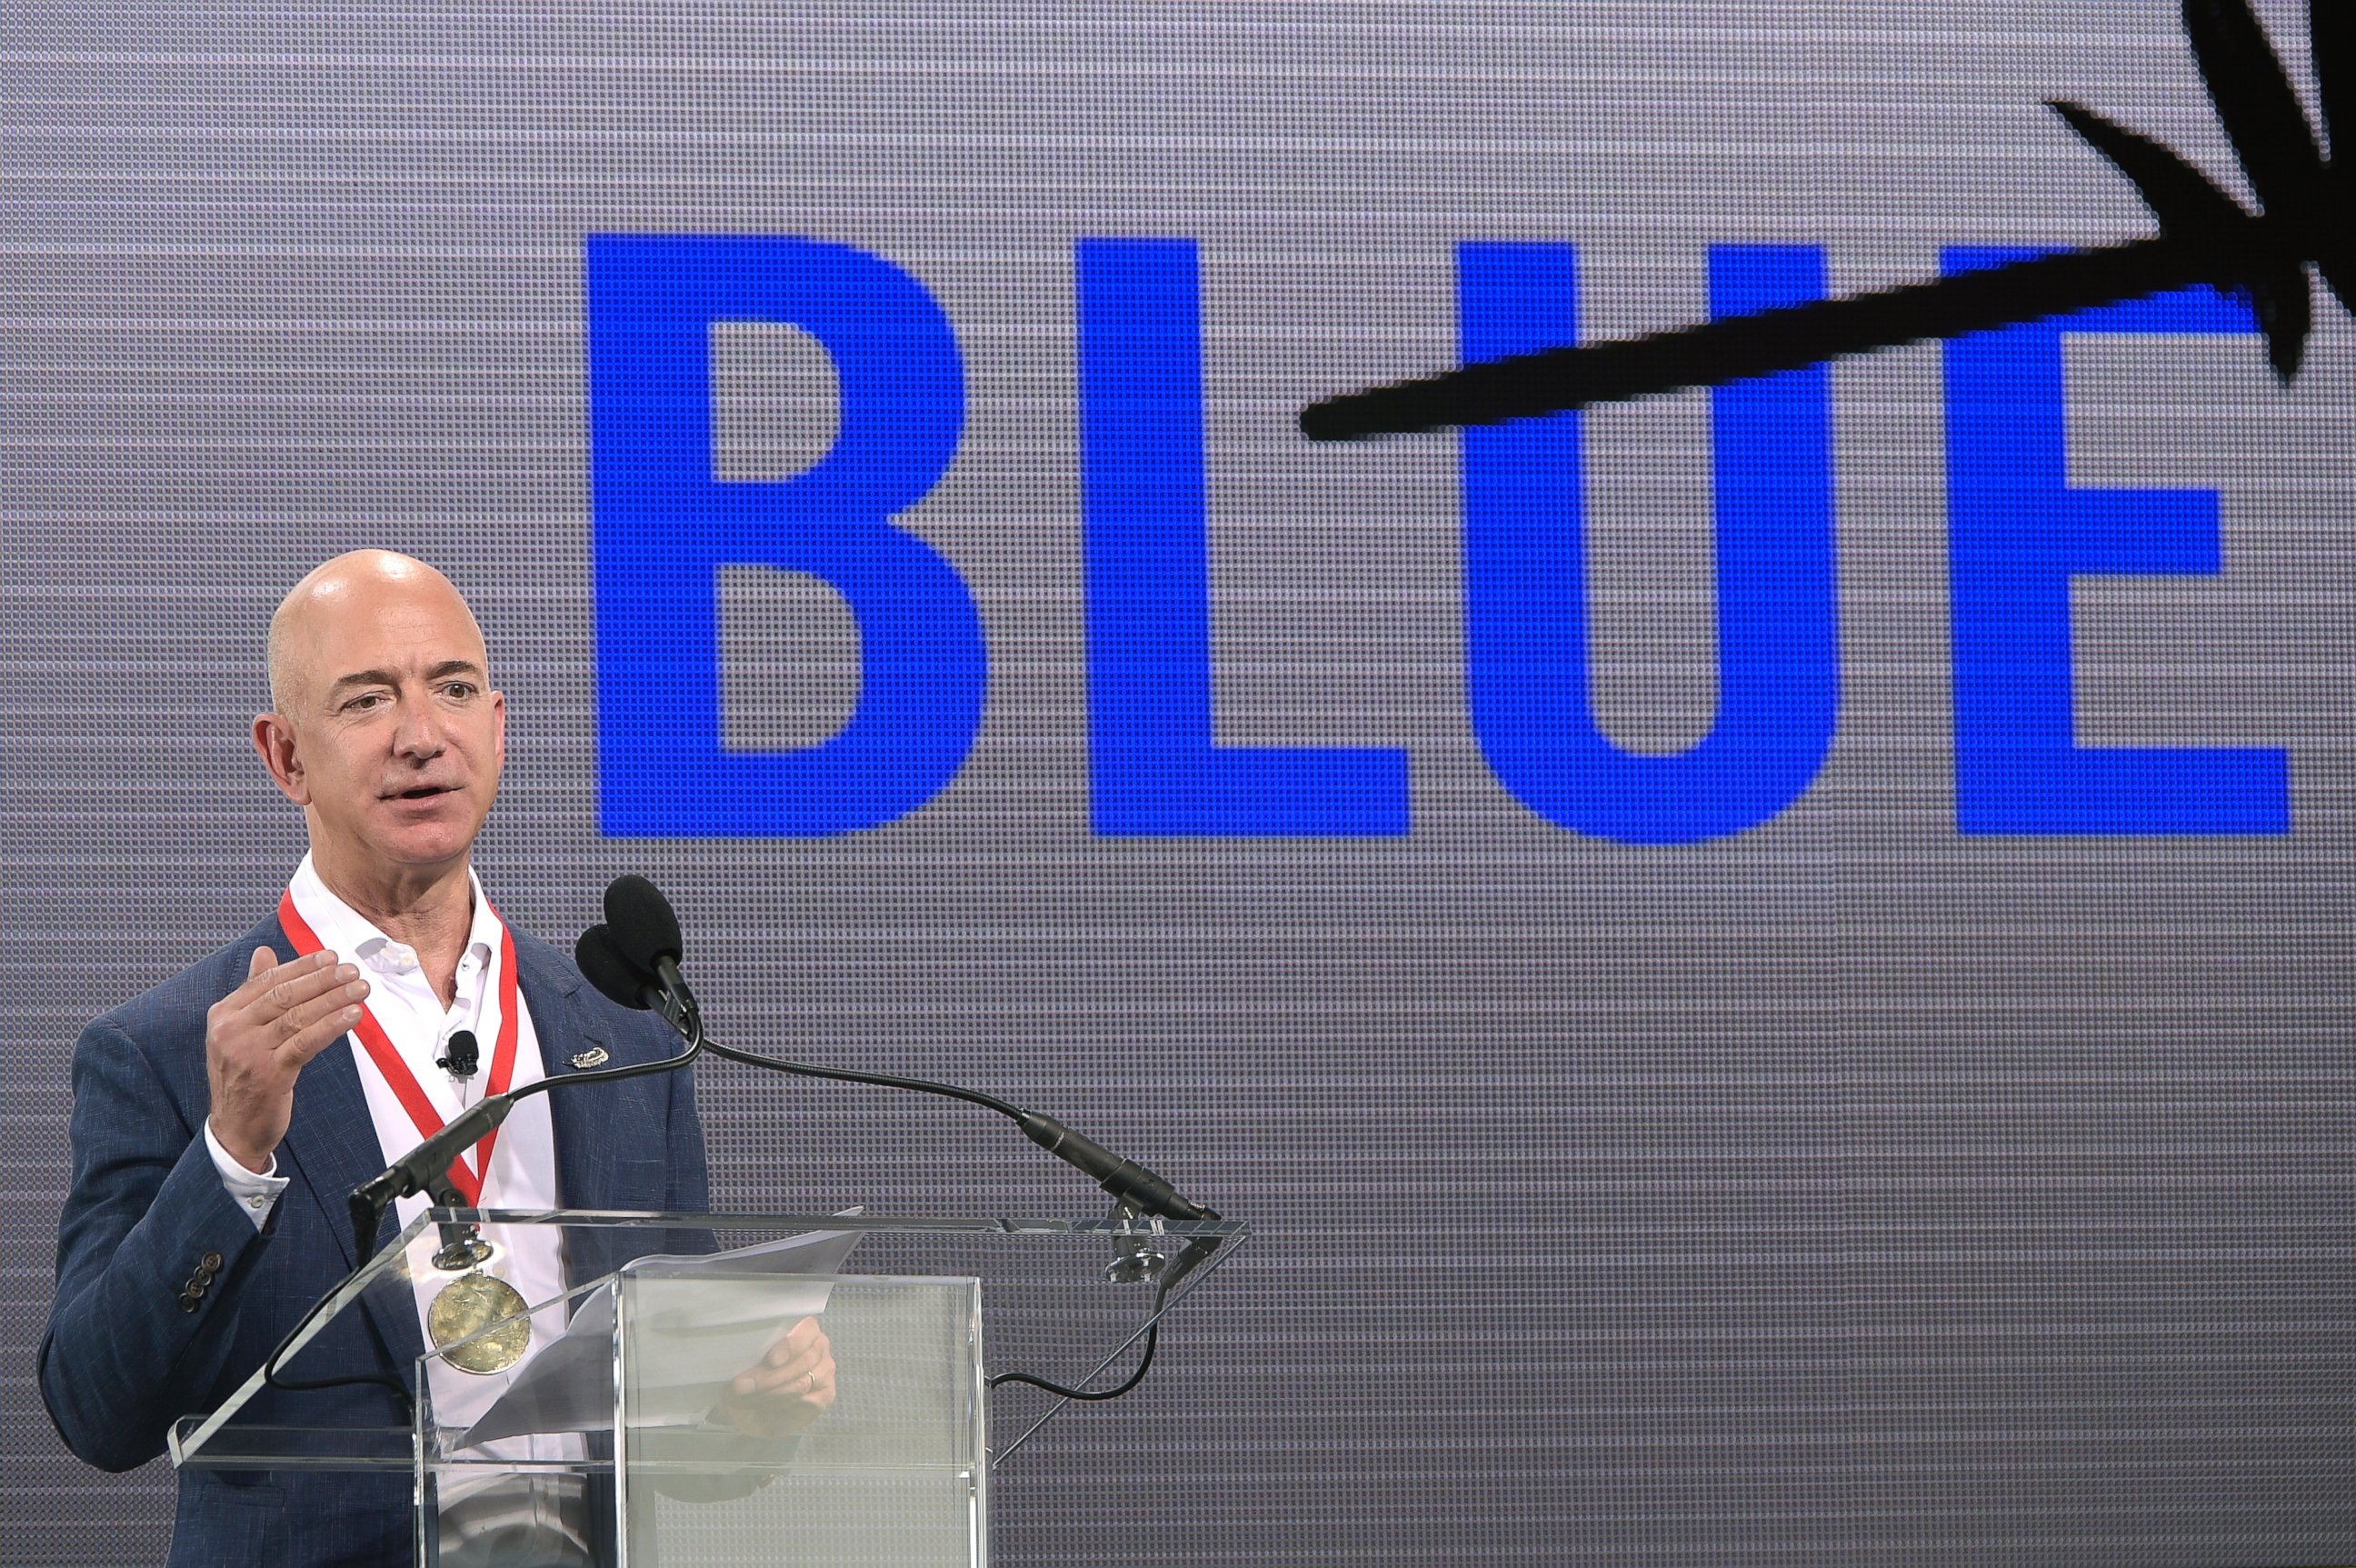 PHOTO: Amazon CEO Jeff Bezos addresses reporters and guests during a news conference unveiling the new Blue Origin rocket at the Cape Canaveral Air Force Station in Cape Canaveral, Fla., Sept. 15, 2015.